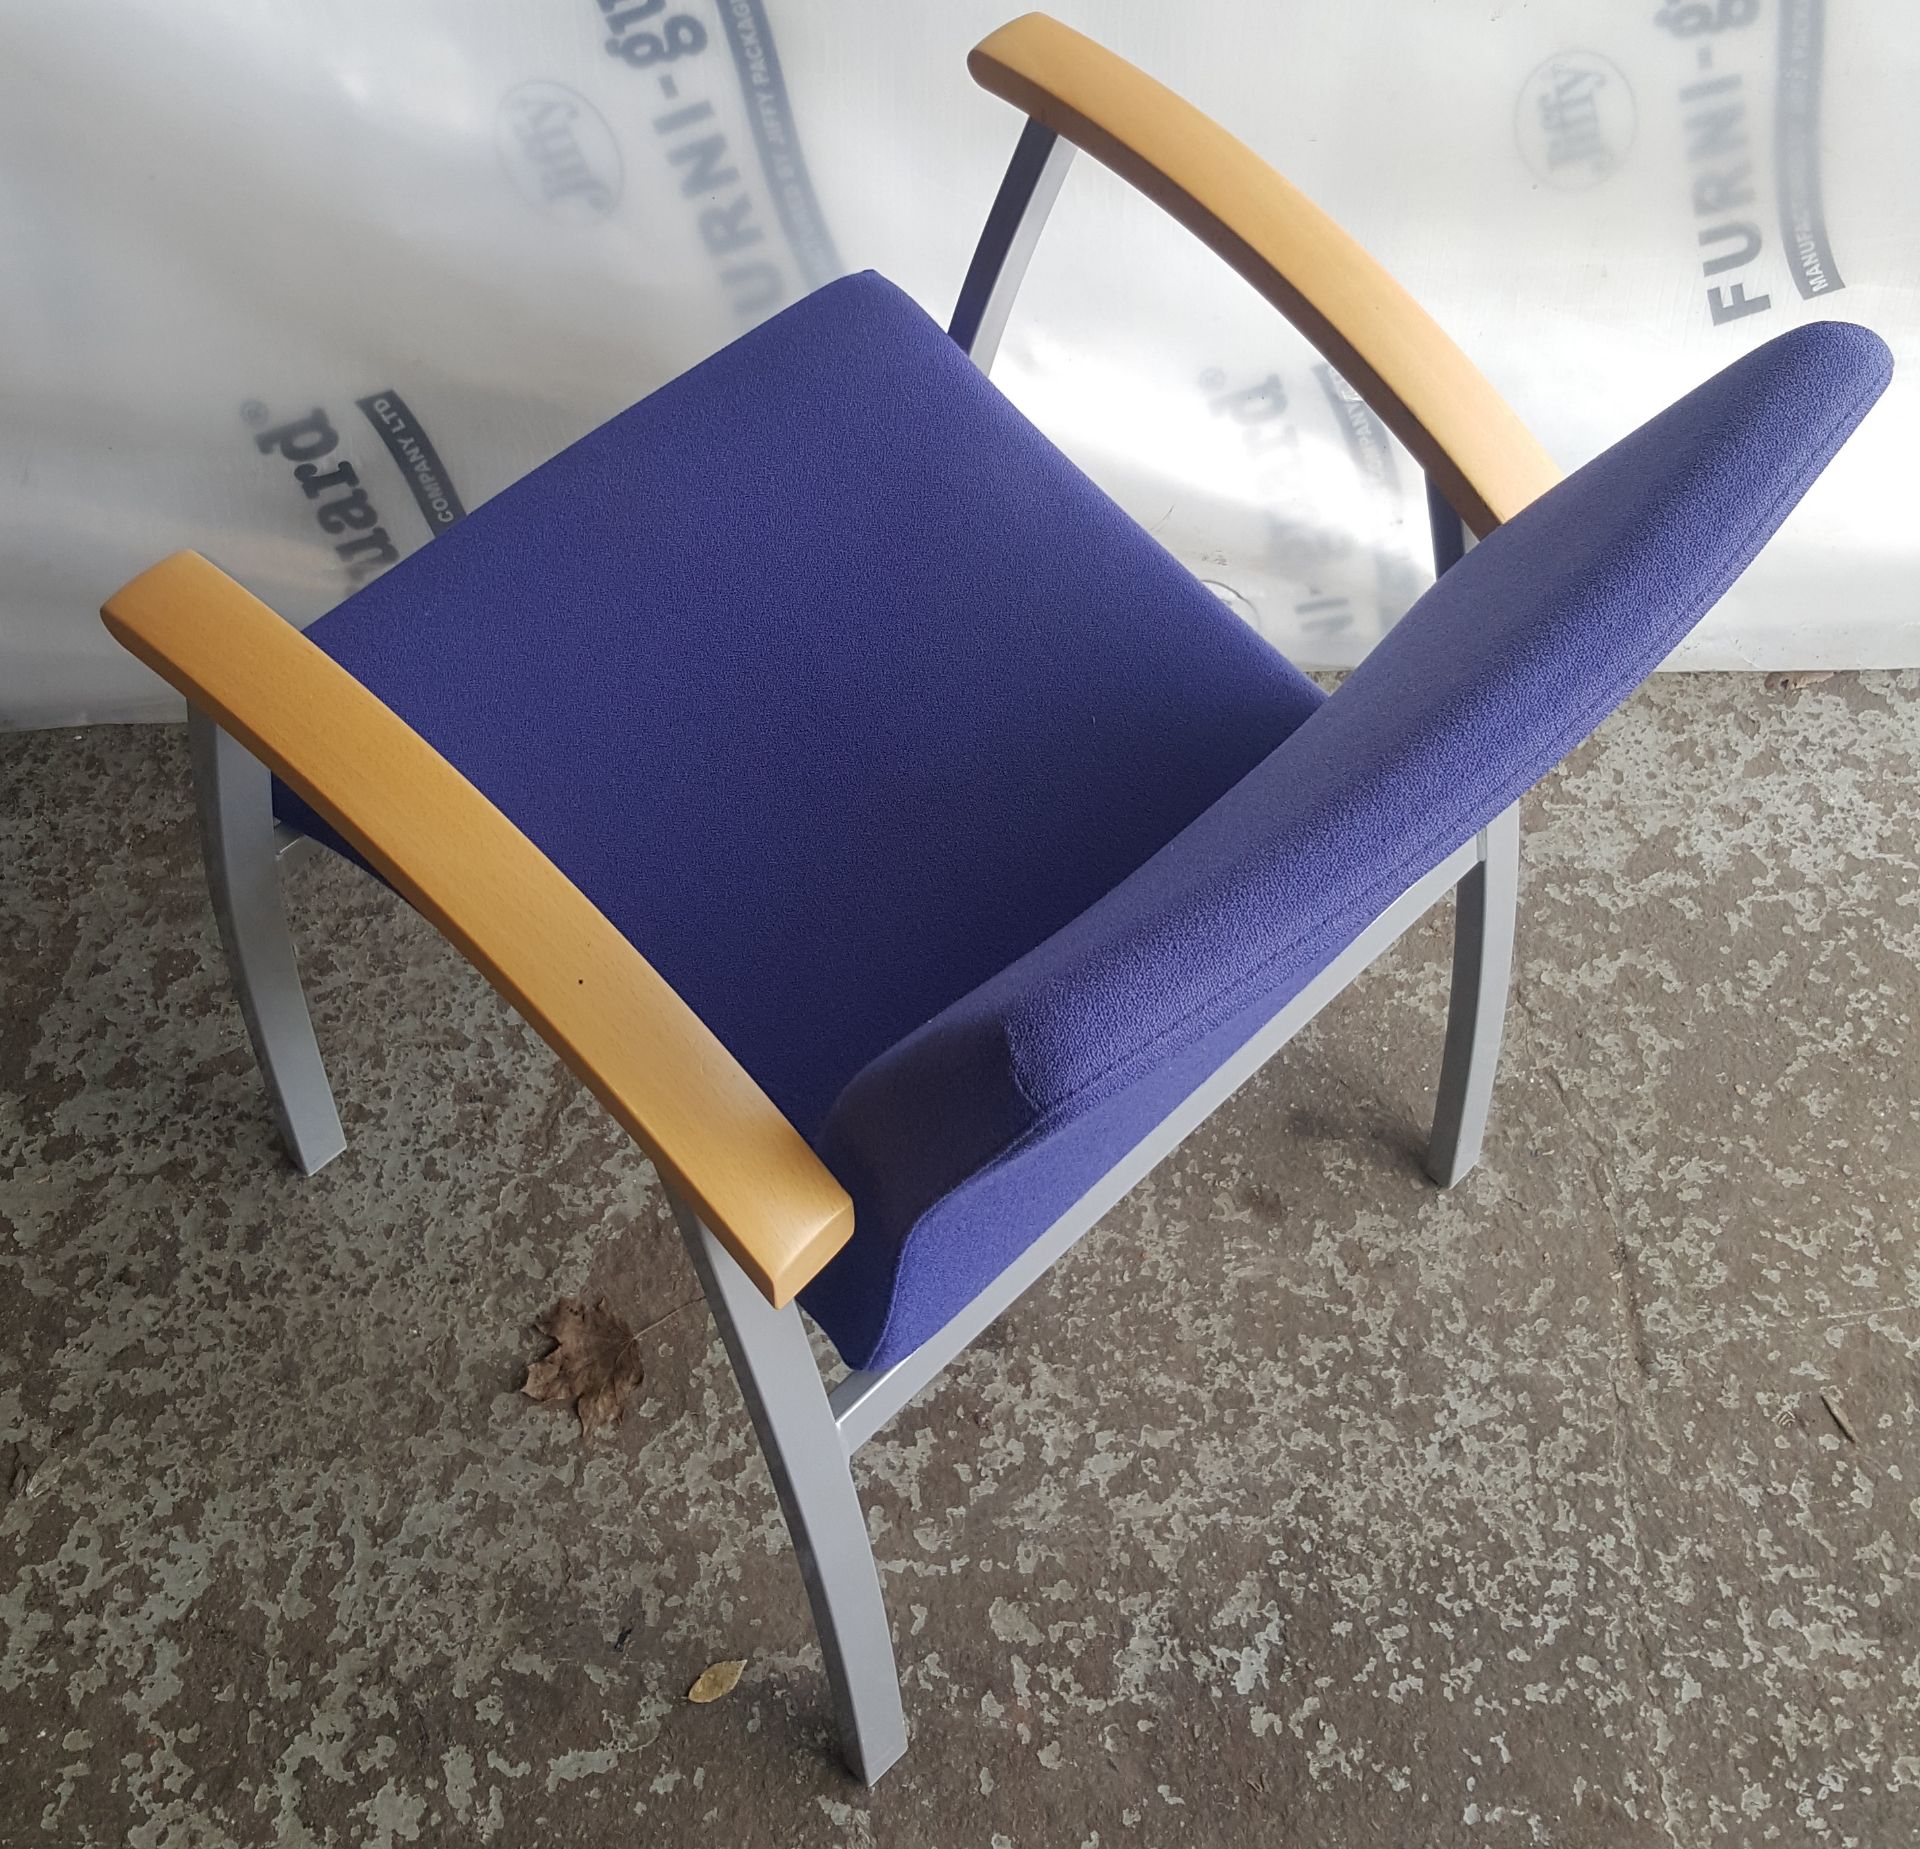 6 x Royal Blue Fabric Stackable Office Chairs - REF: TofT - CL011 - Location: Altrincham WA14 - Image 3 of 6